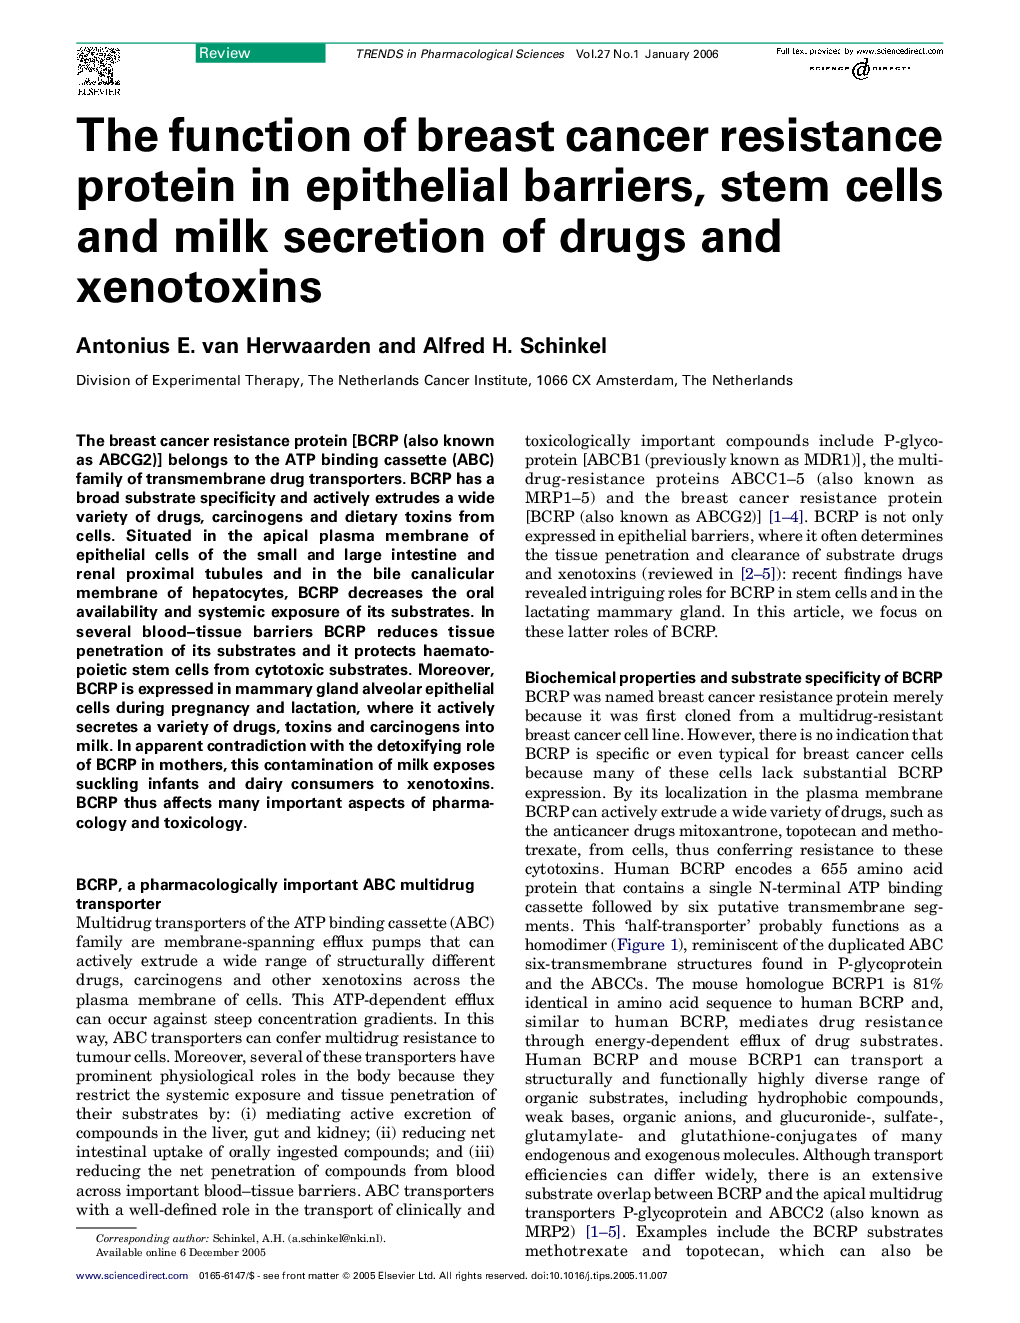 The function of breast cancer resistance protein in epithelial barriers, stem cells and milk secretion of drugs and xenotoxins